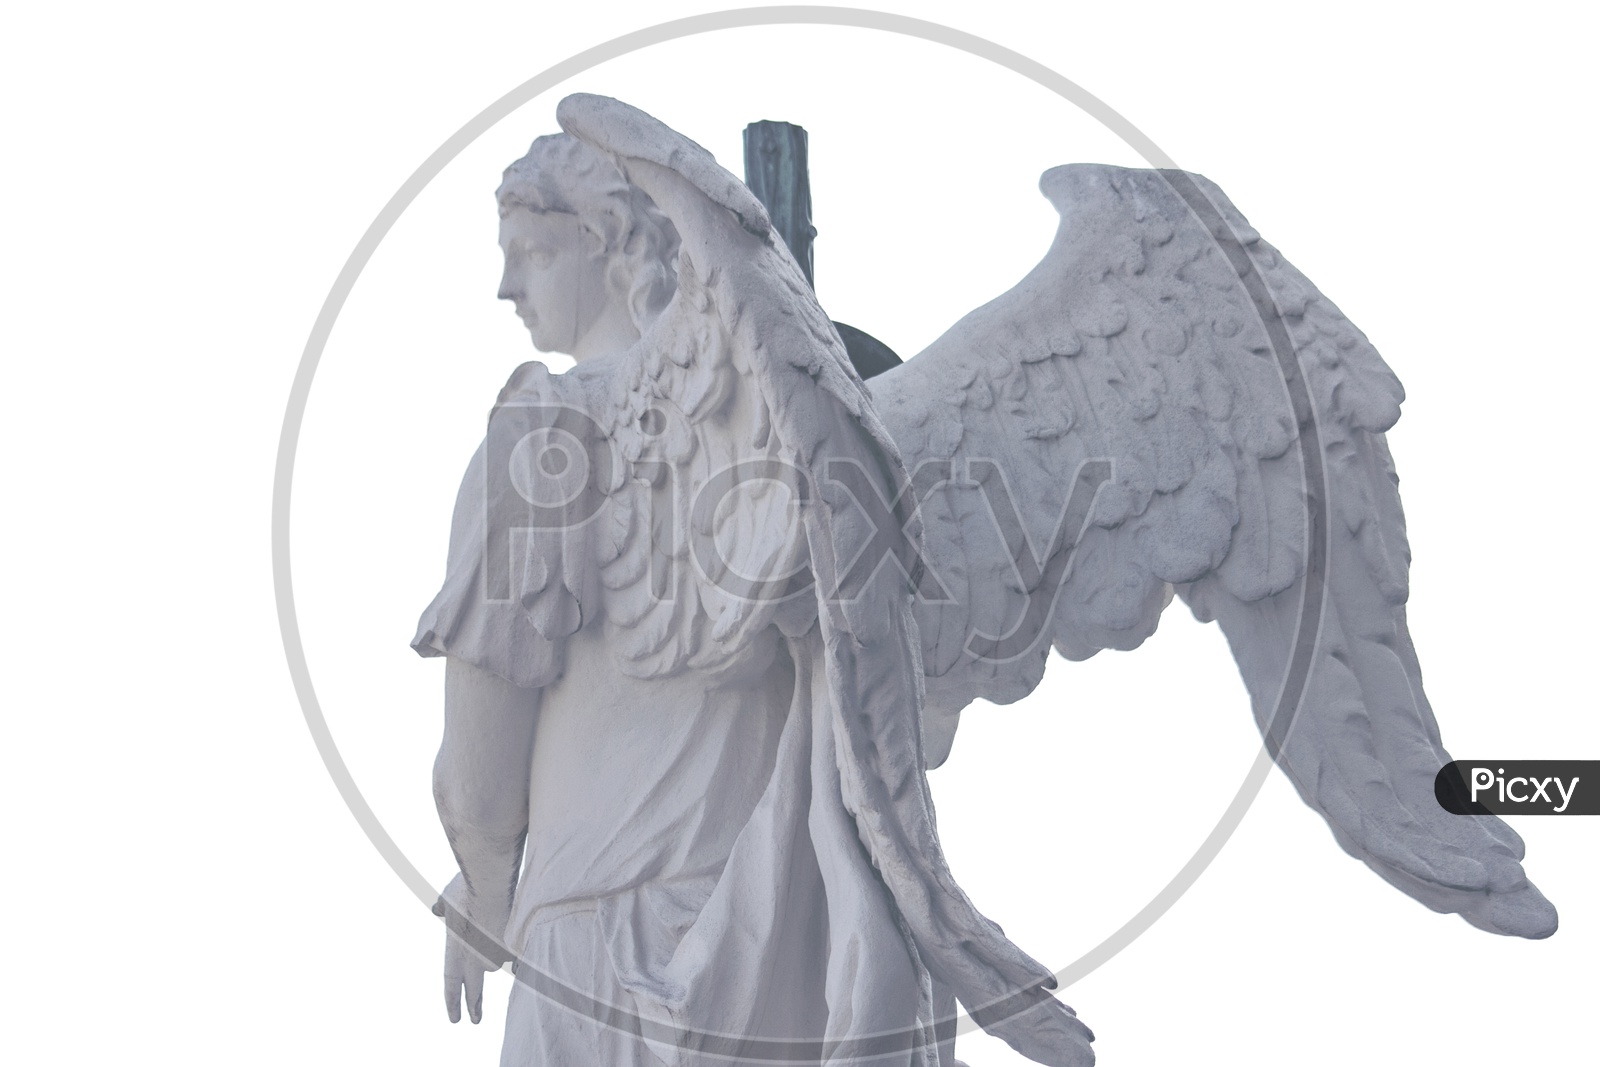 Greek angel statue isolated on white